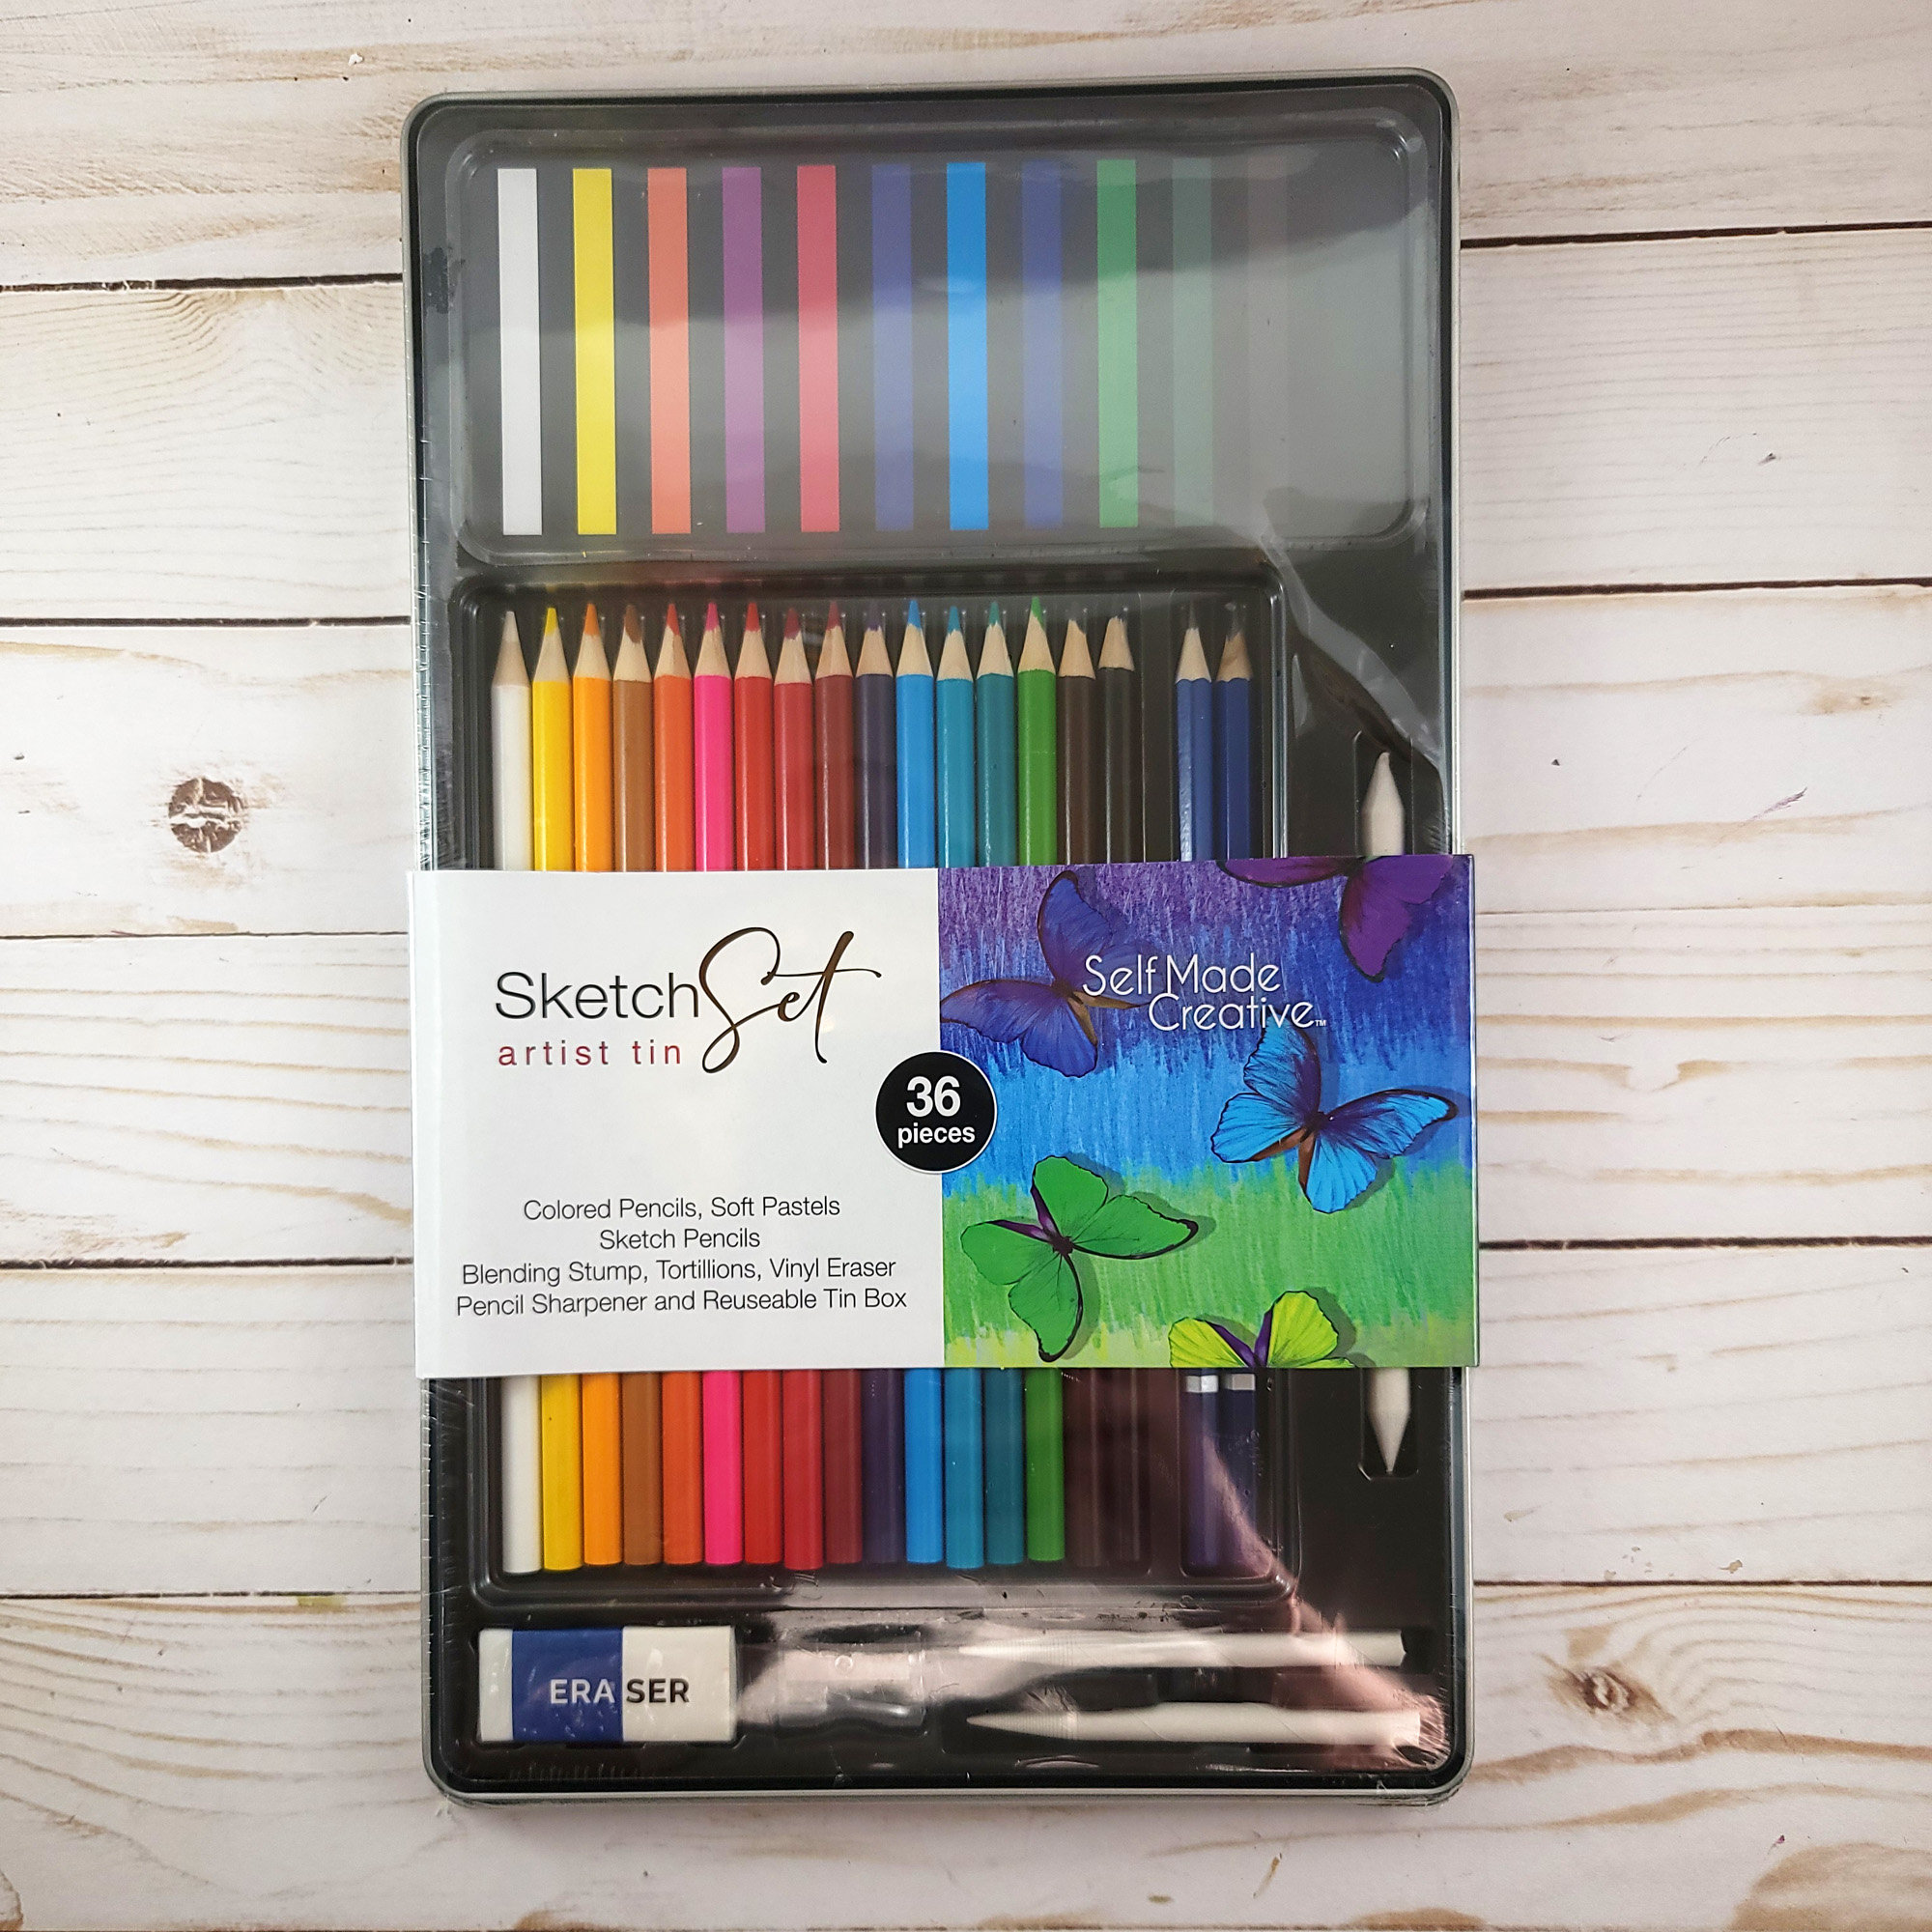 50 Colored Coloring Pencils Adult Coloring Books, Drawing, Bible Study,  Journaling, Planner, Diary Sargent Colored Pencil Artist Set 